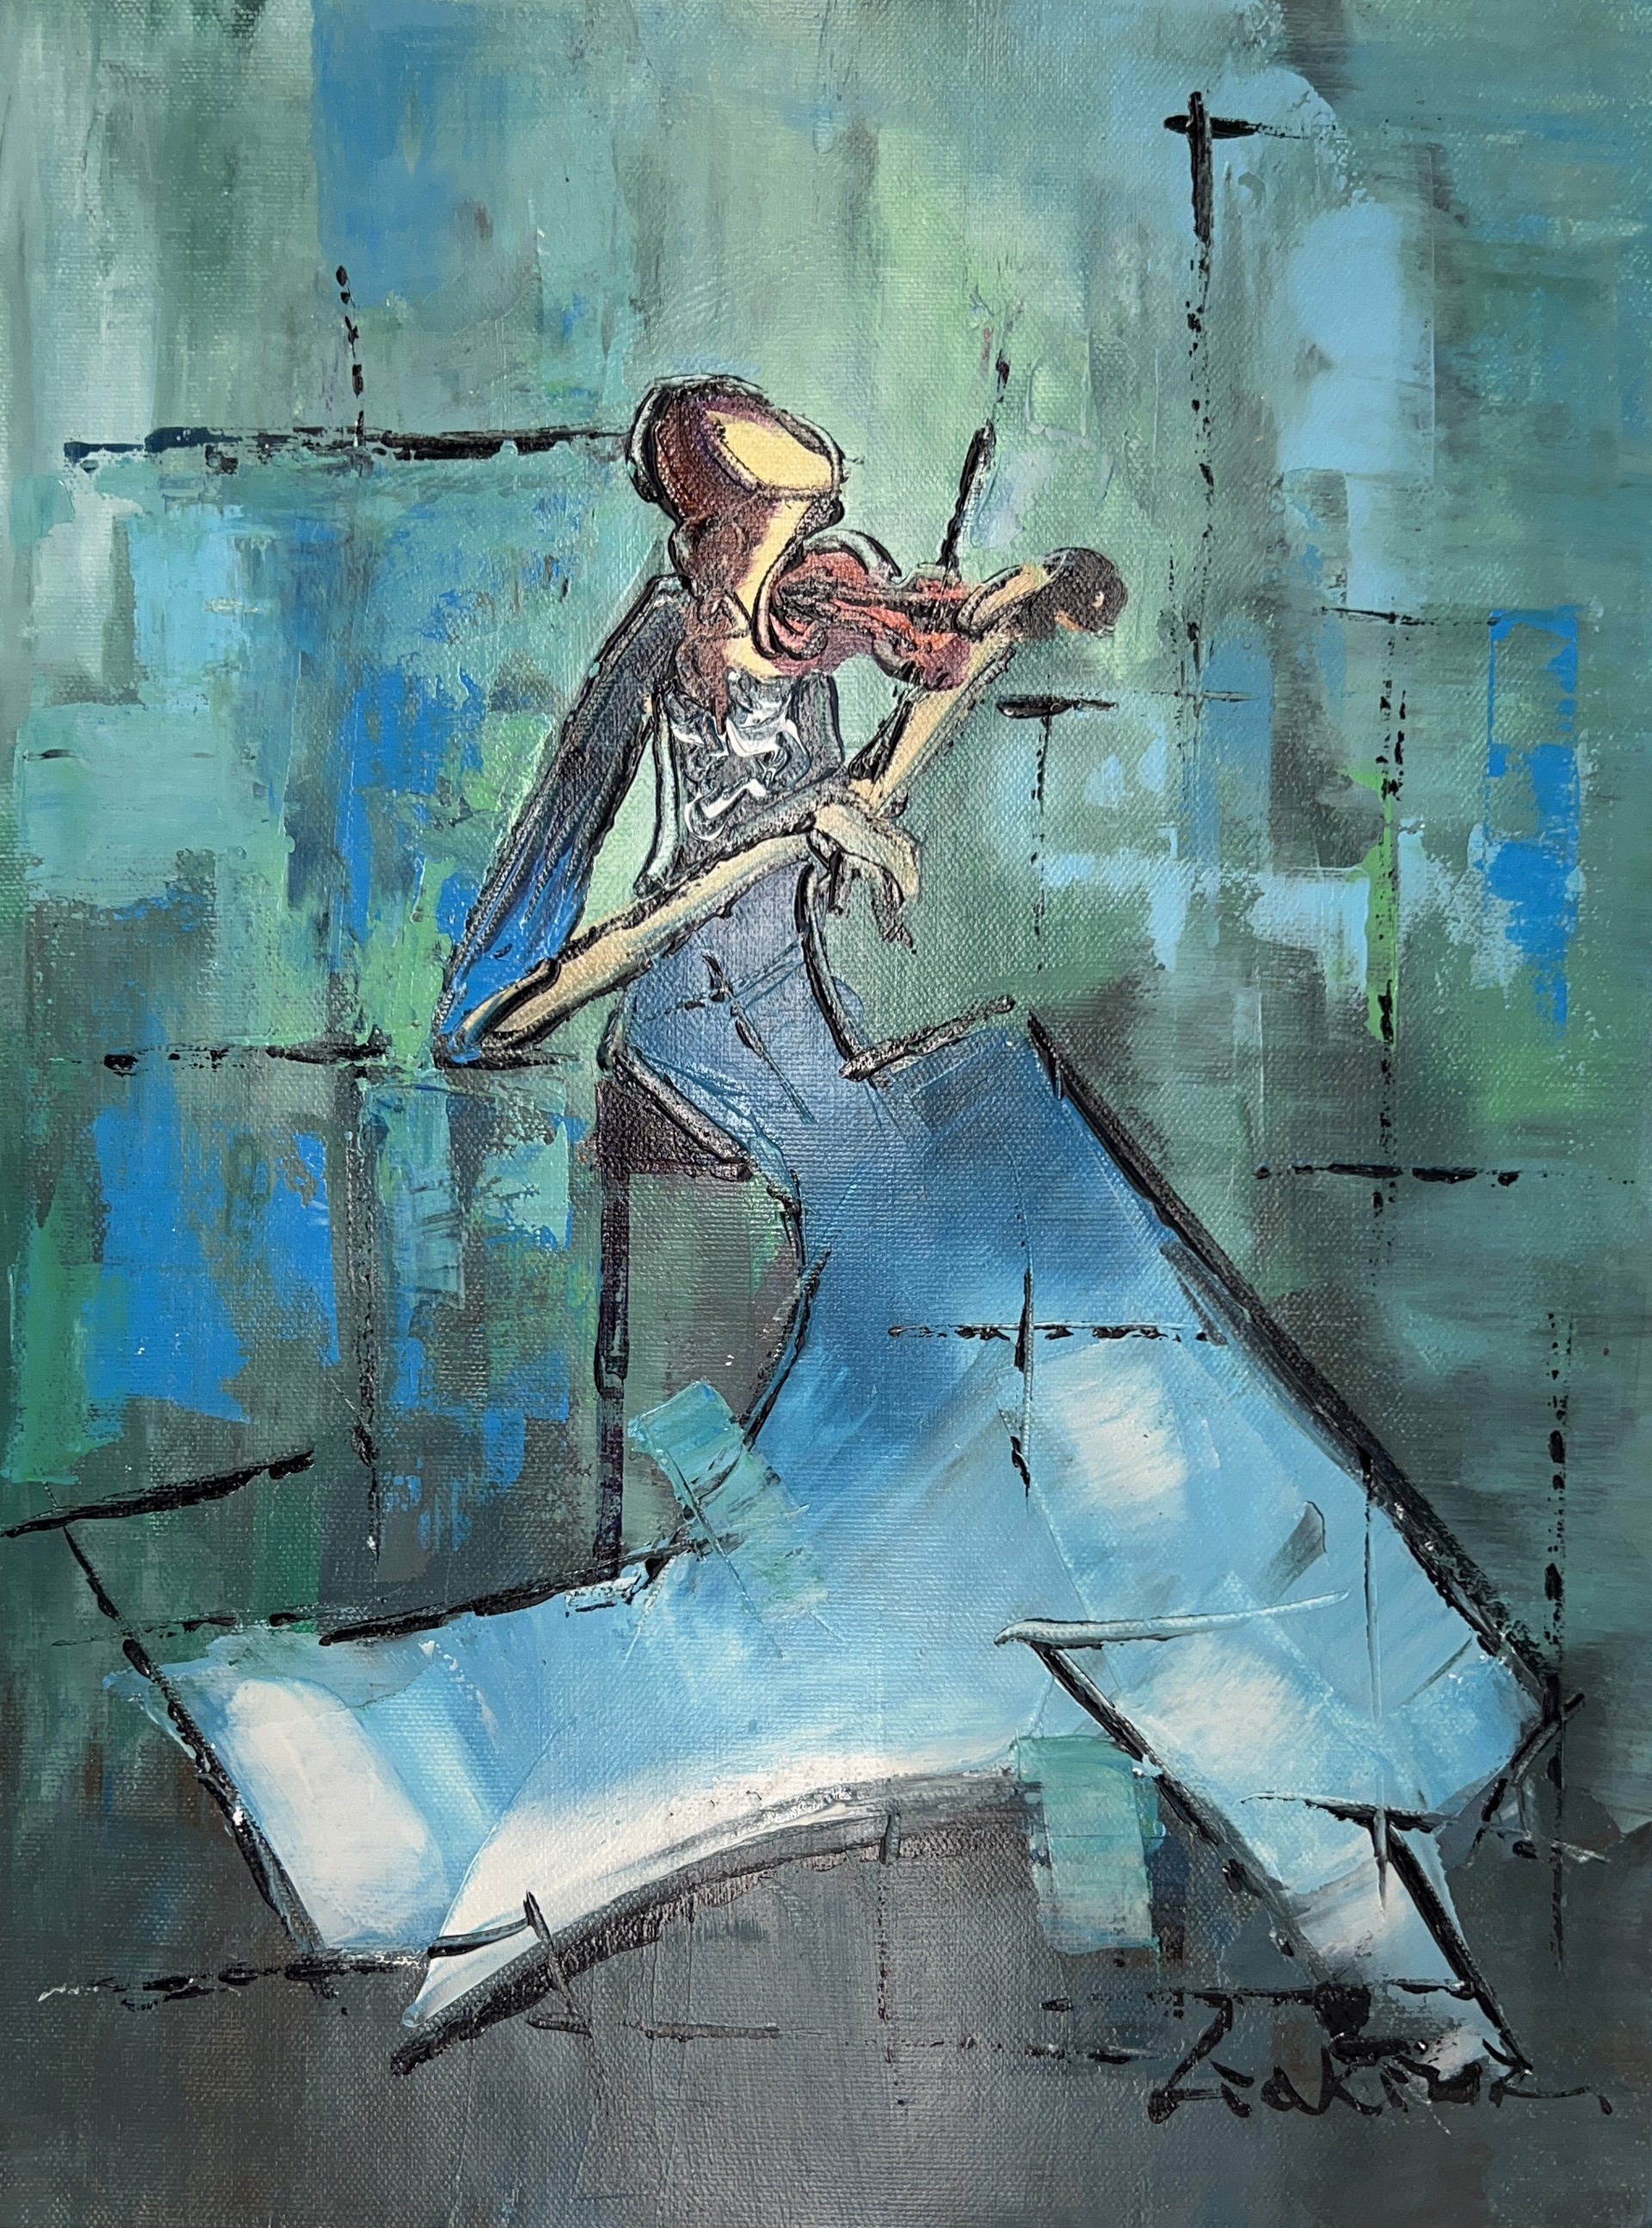 VIOLINIST IN BLUE WITH WHITE TRIM by LIA KIM